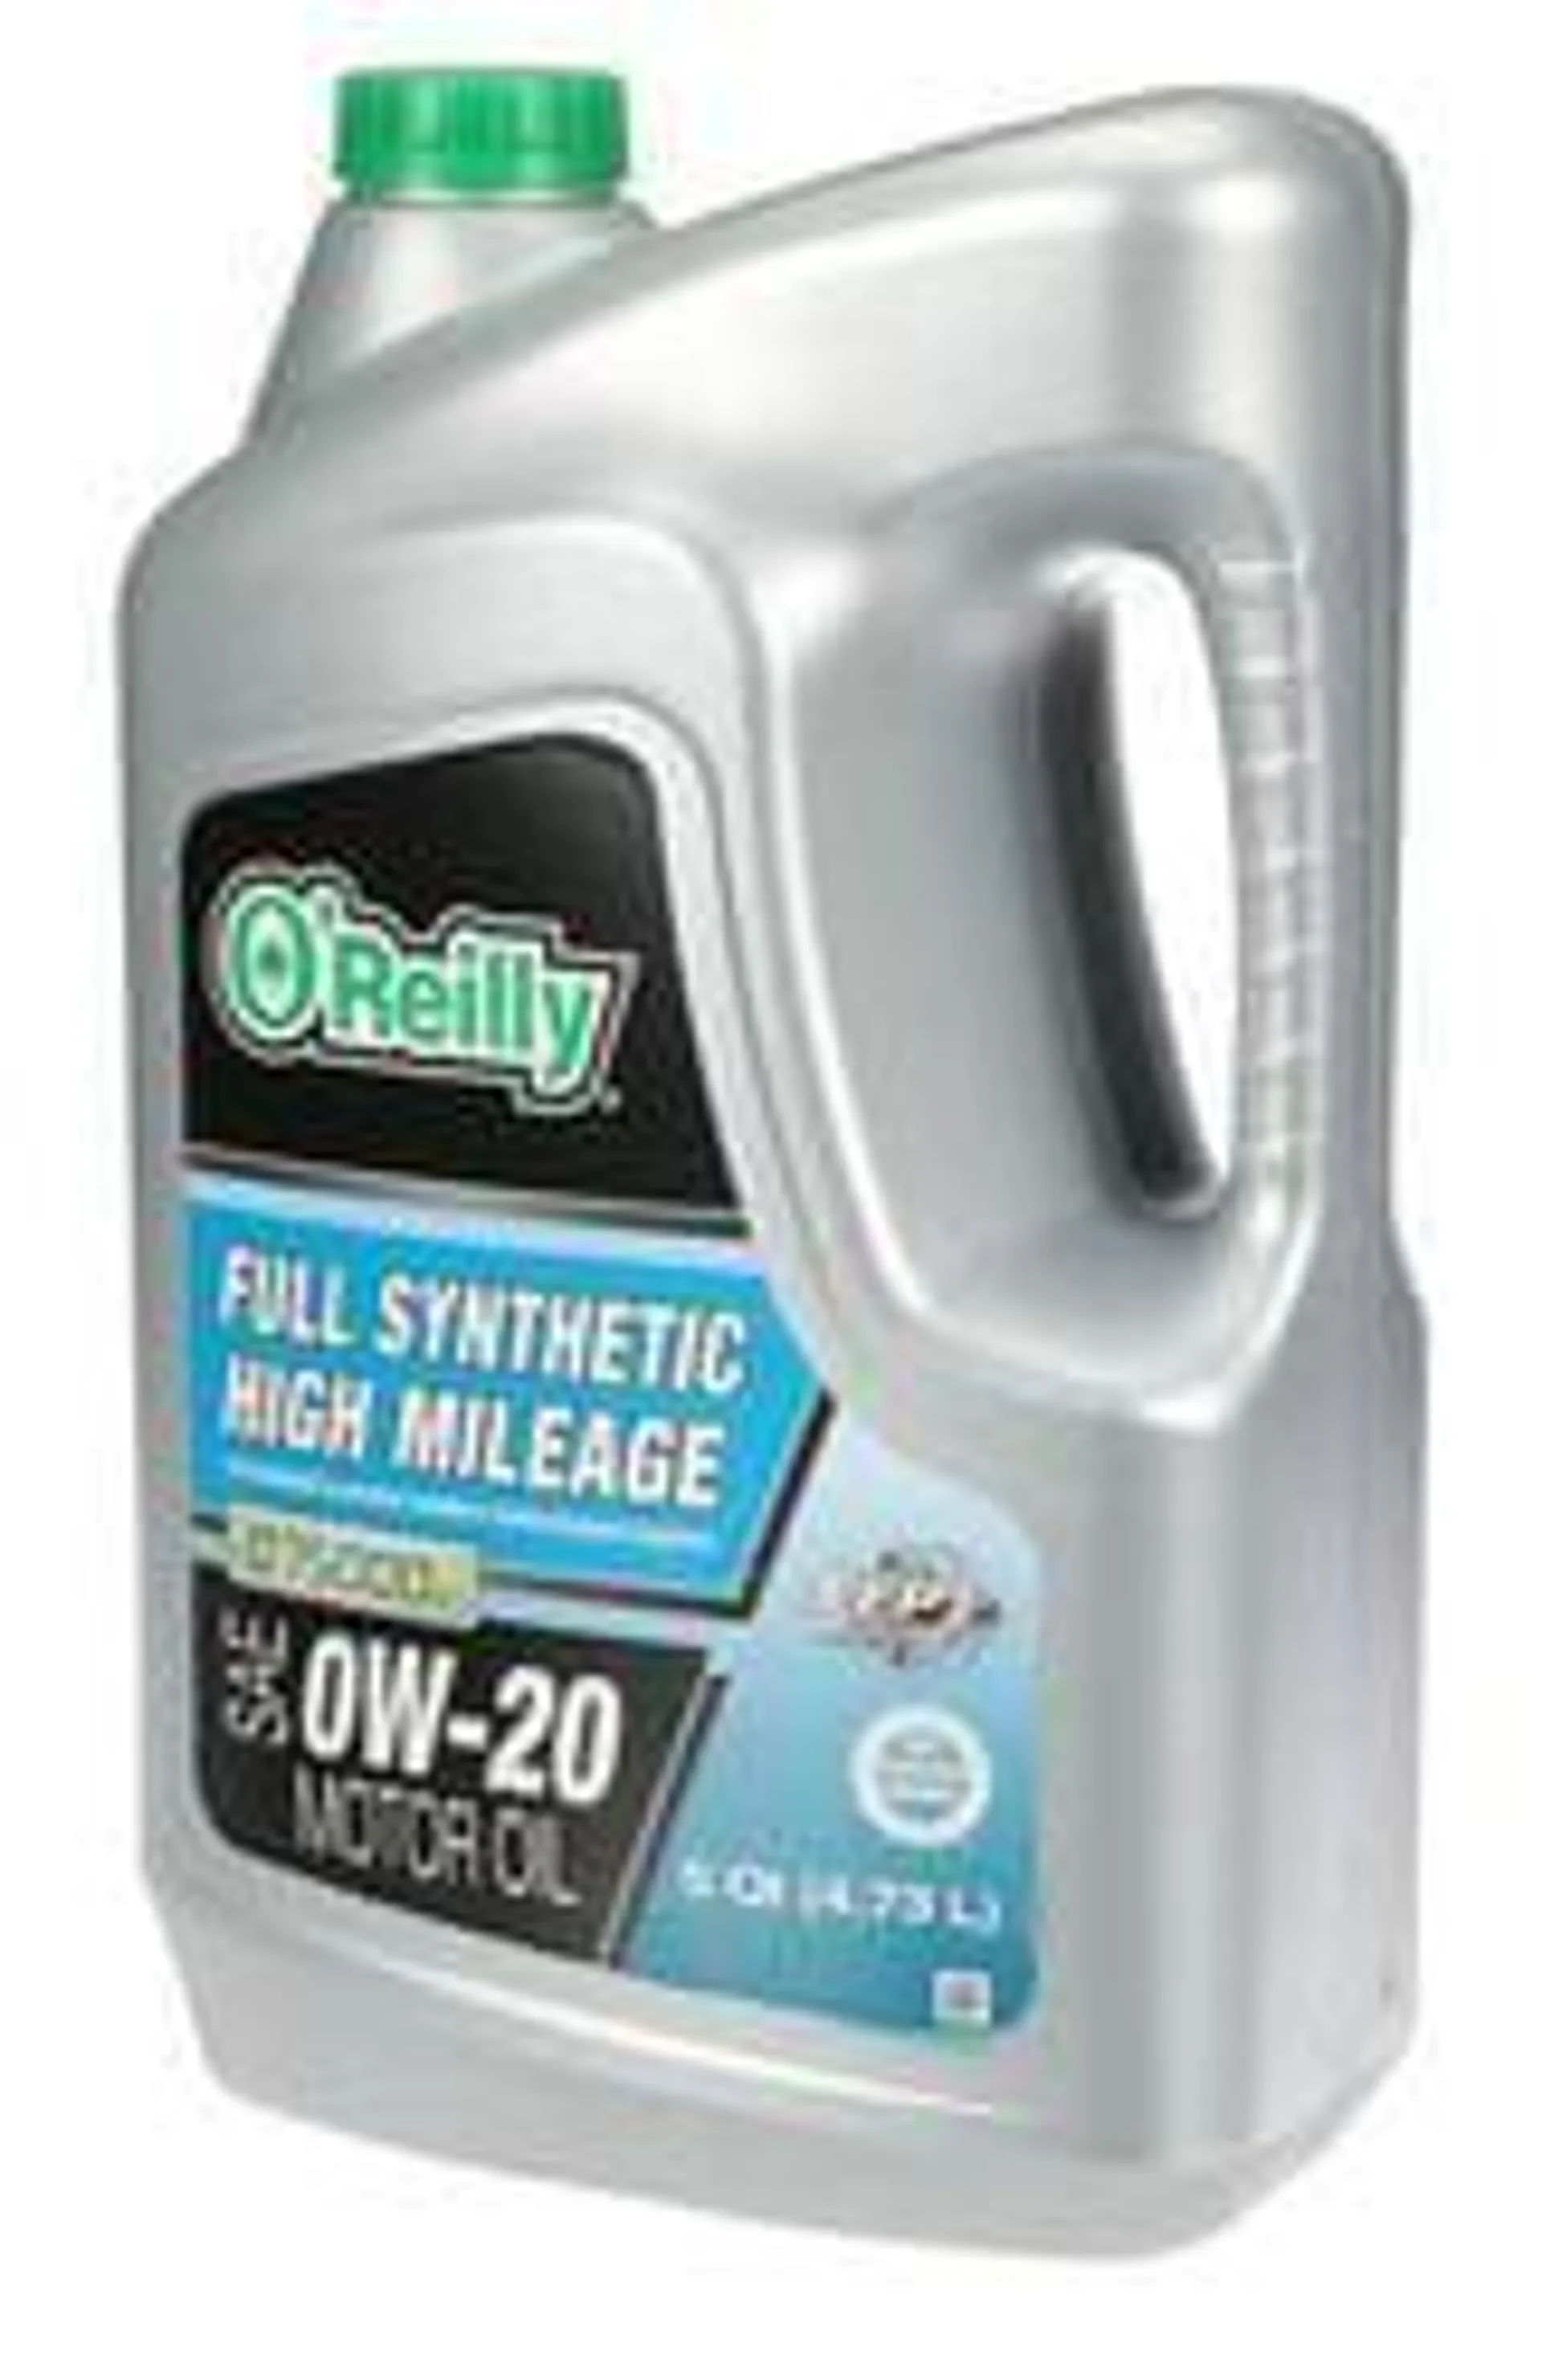 O'Reilly Full Synthetic Full Synthetic High Mileage Motor Oil 0W-20 5 Quart - HISYN0-20-5QT